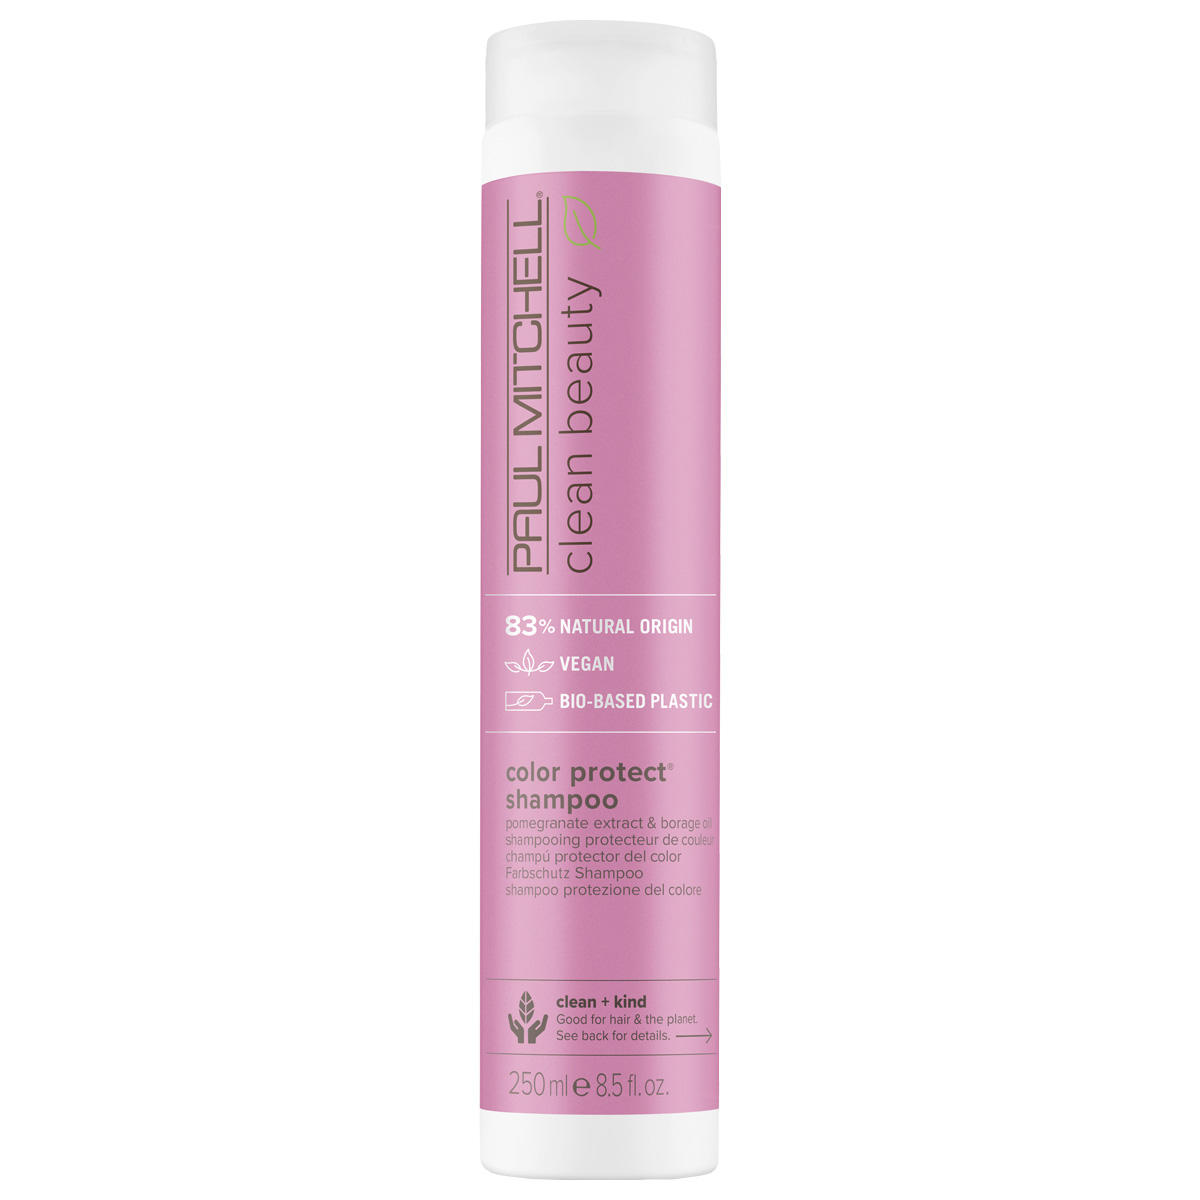 Paul Mitchell Clean Beauty Color Protect Shampoo  - 1